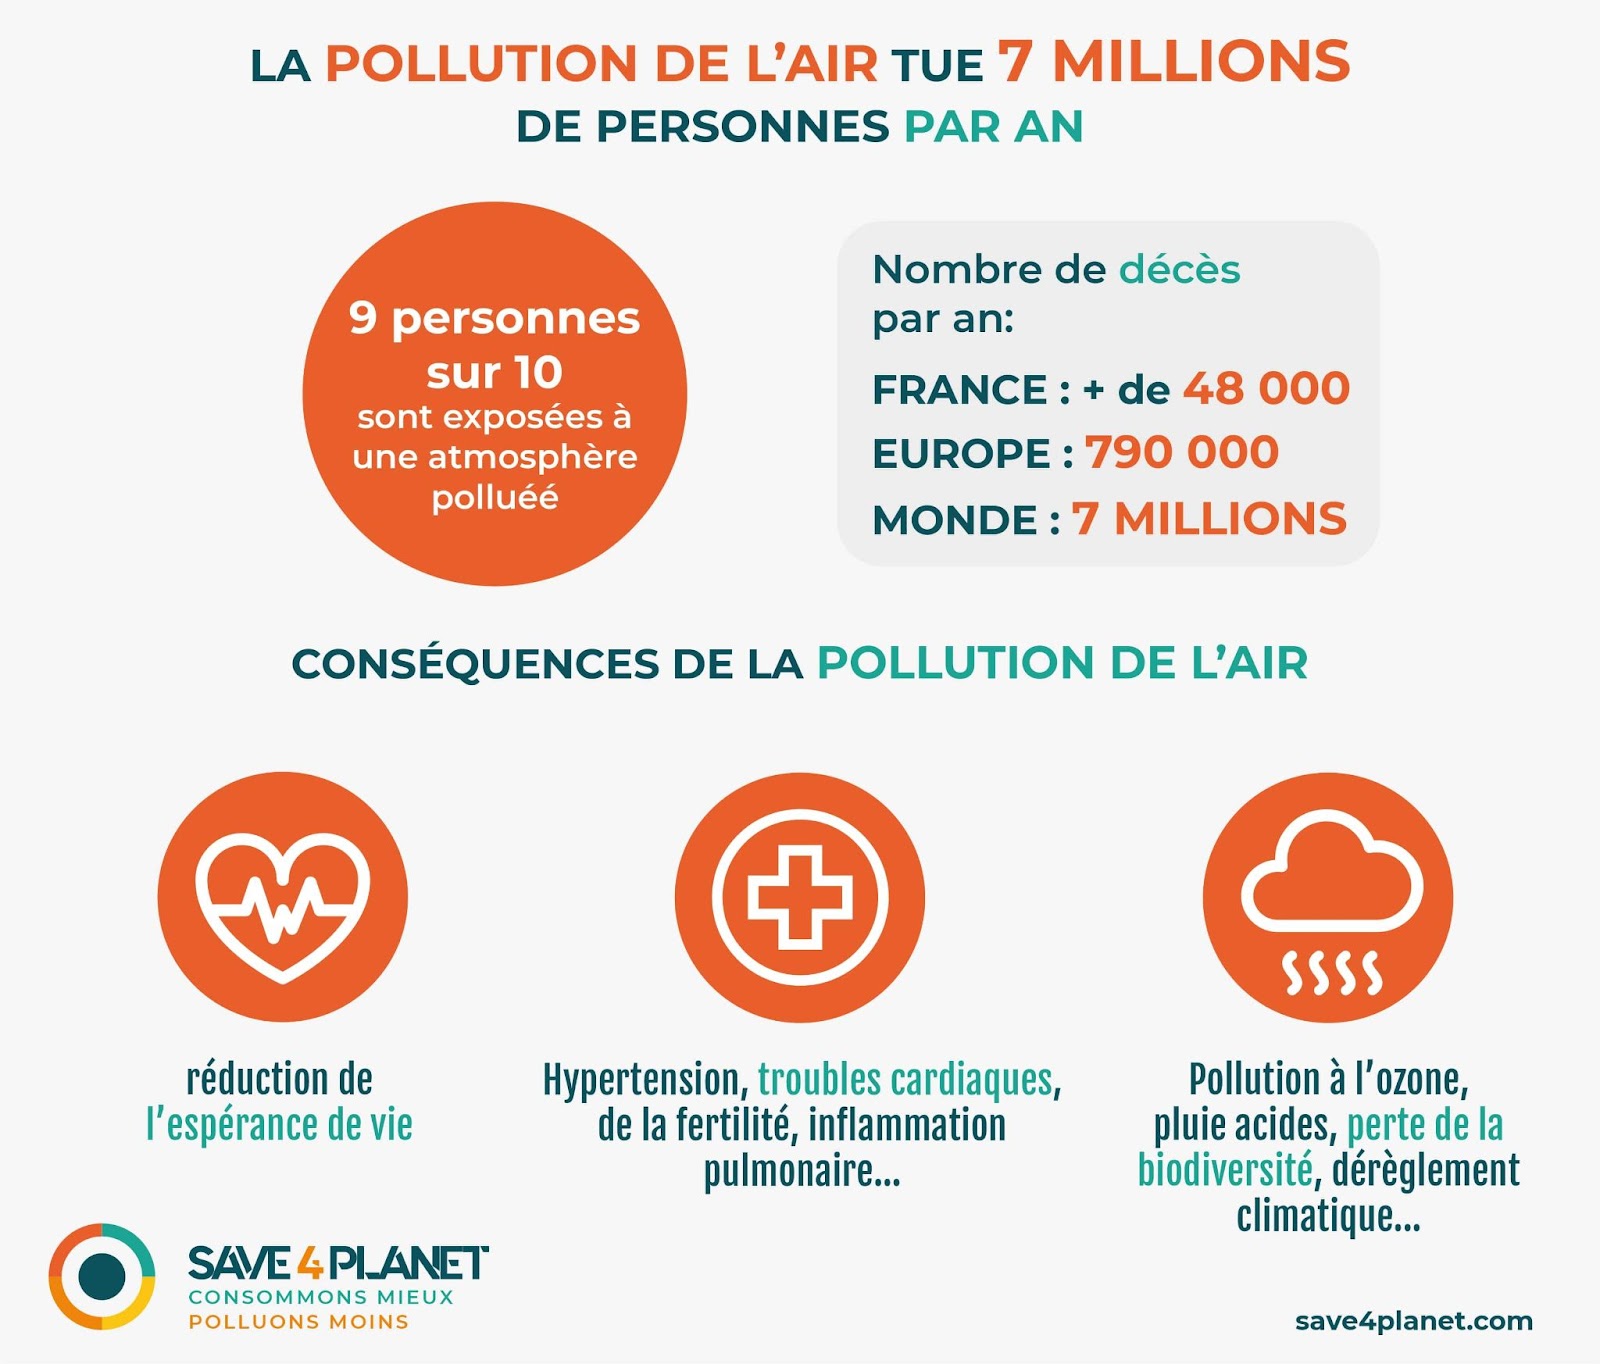 image Pollution air morts 